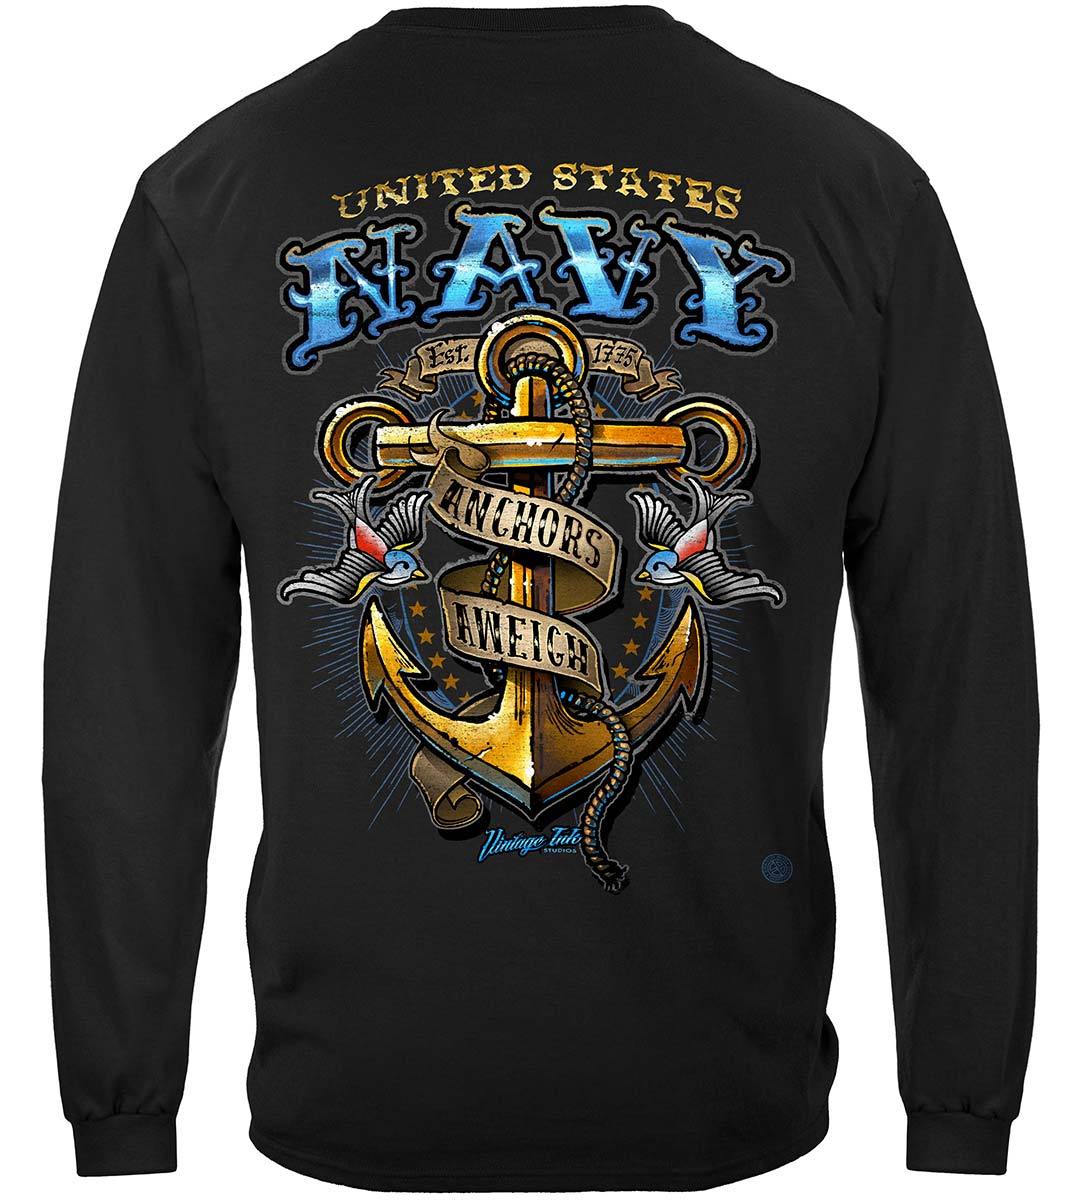 US NAVY Vintage Tattoo Classic Anchor United States Navy USN Premium Hooded Sweat Shirt